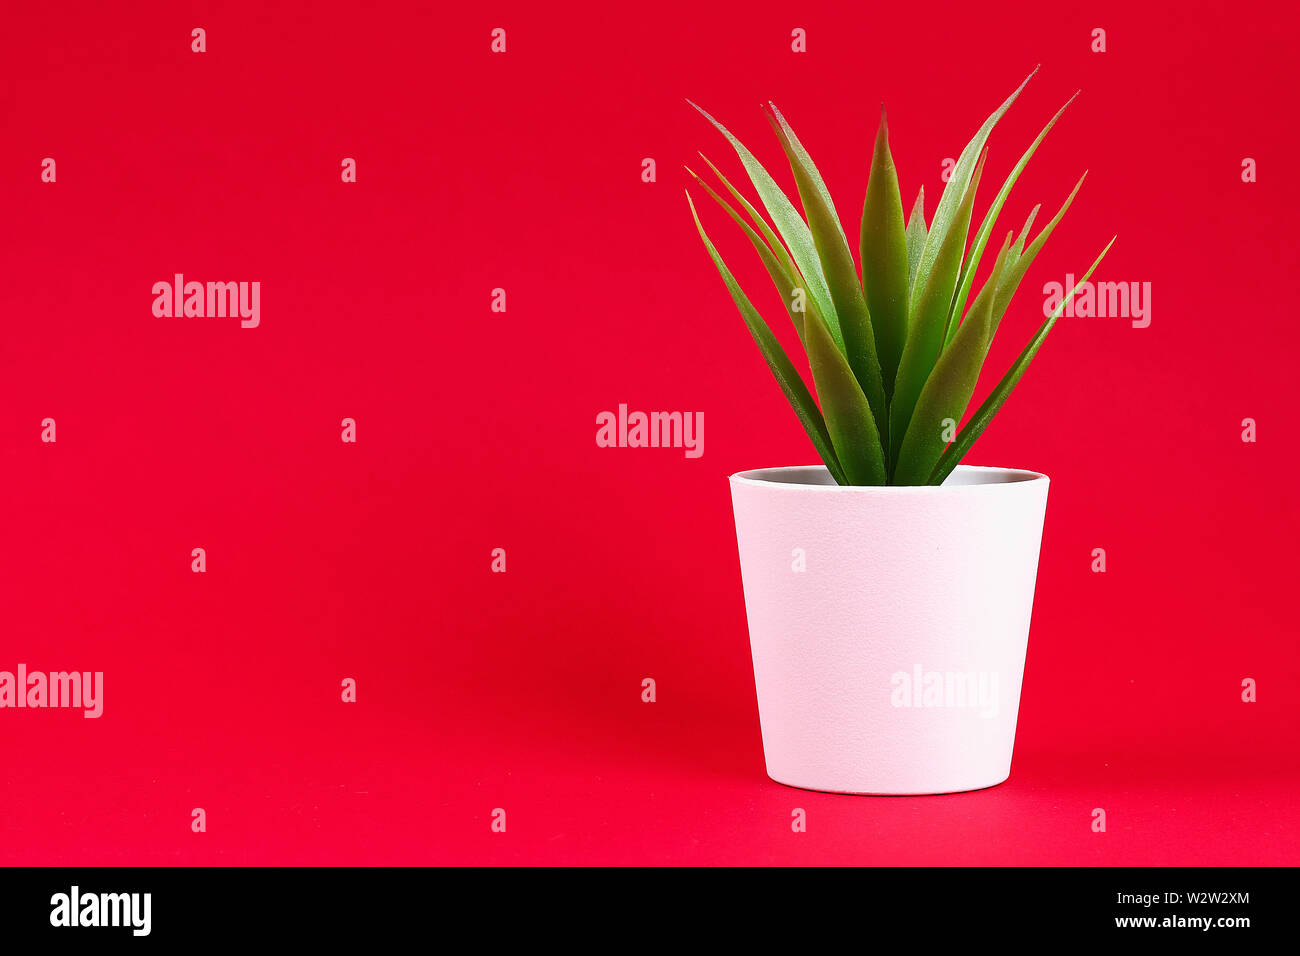 Artificial green grass in a white small pot on a red burgundy background. Copy space. Stock Photo